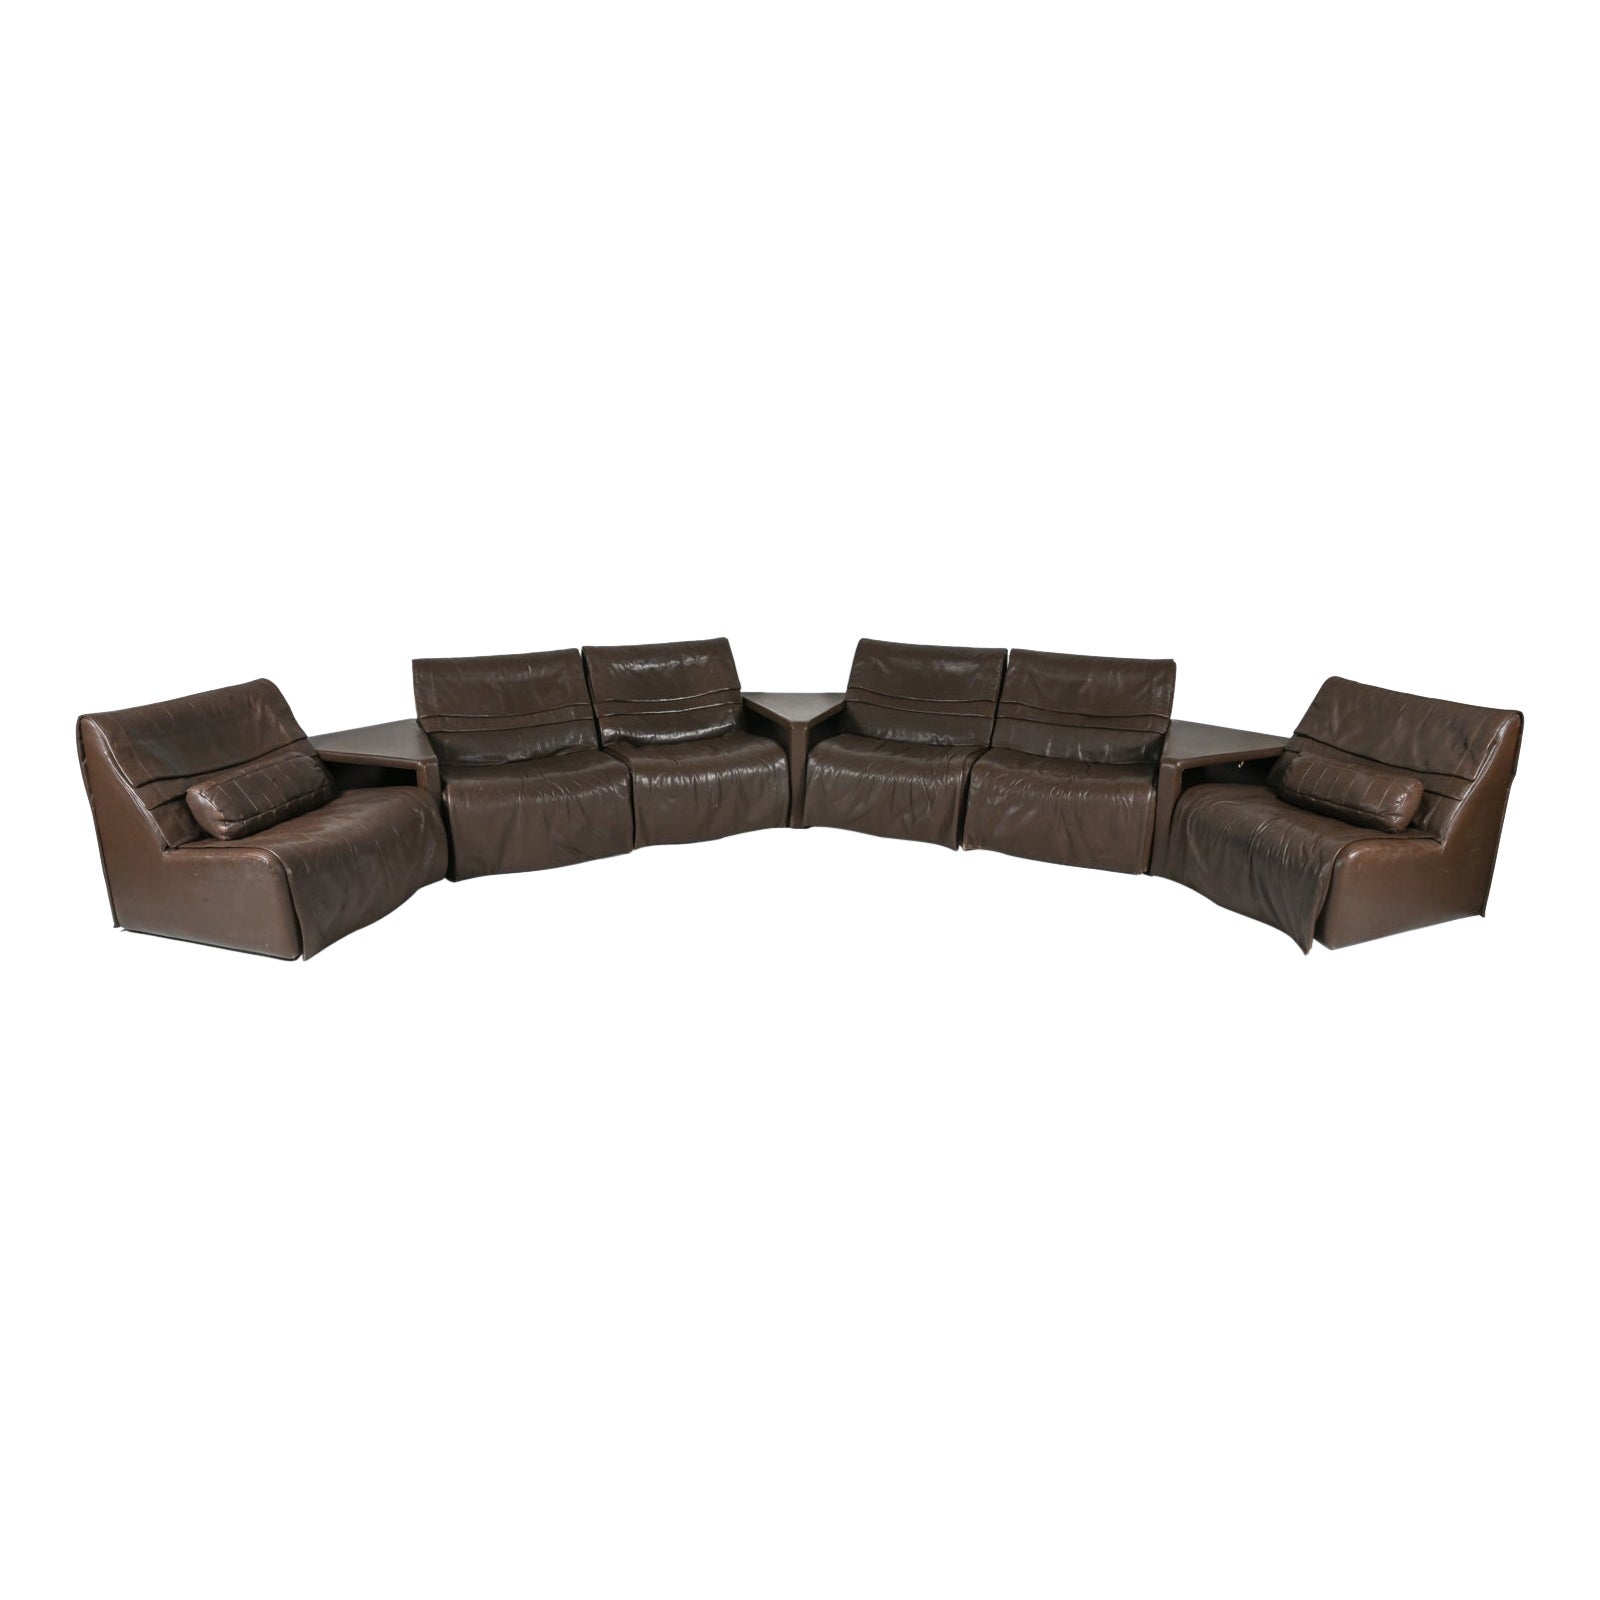 De Sede DS 500 Modular Sectional Sofa & Table Suite in Brown Leather For Sale